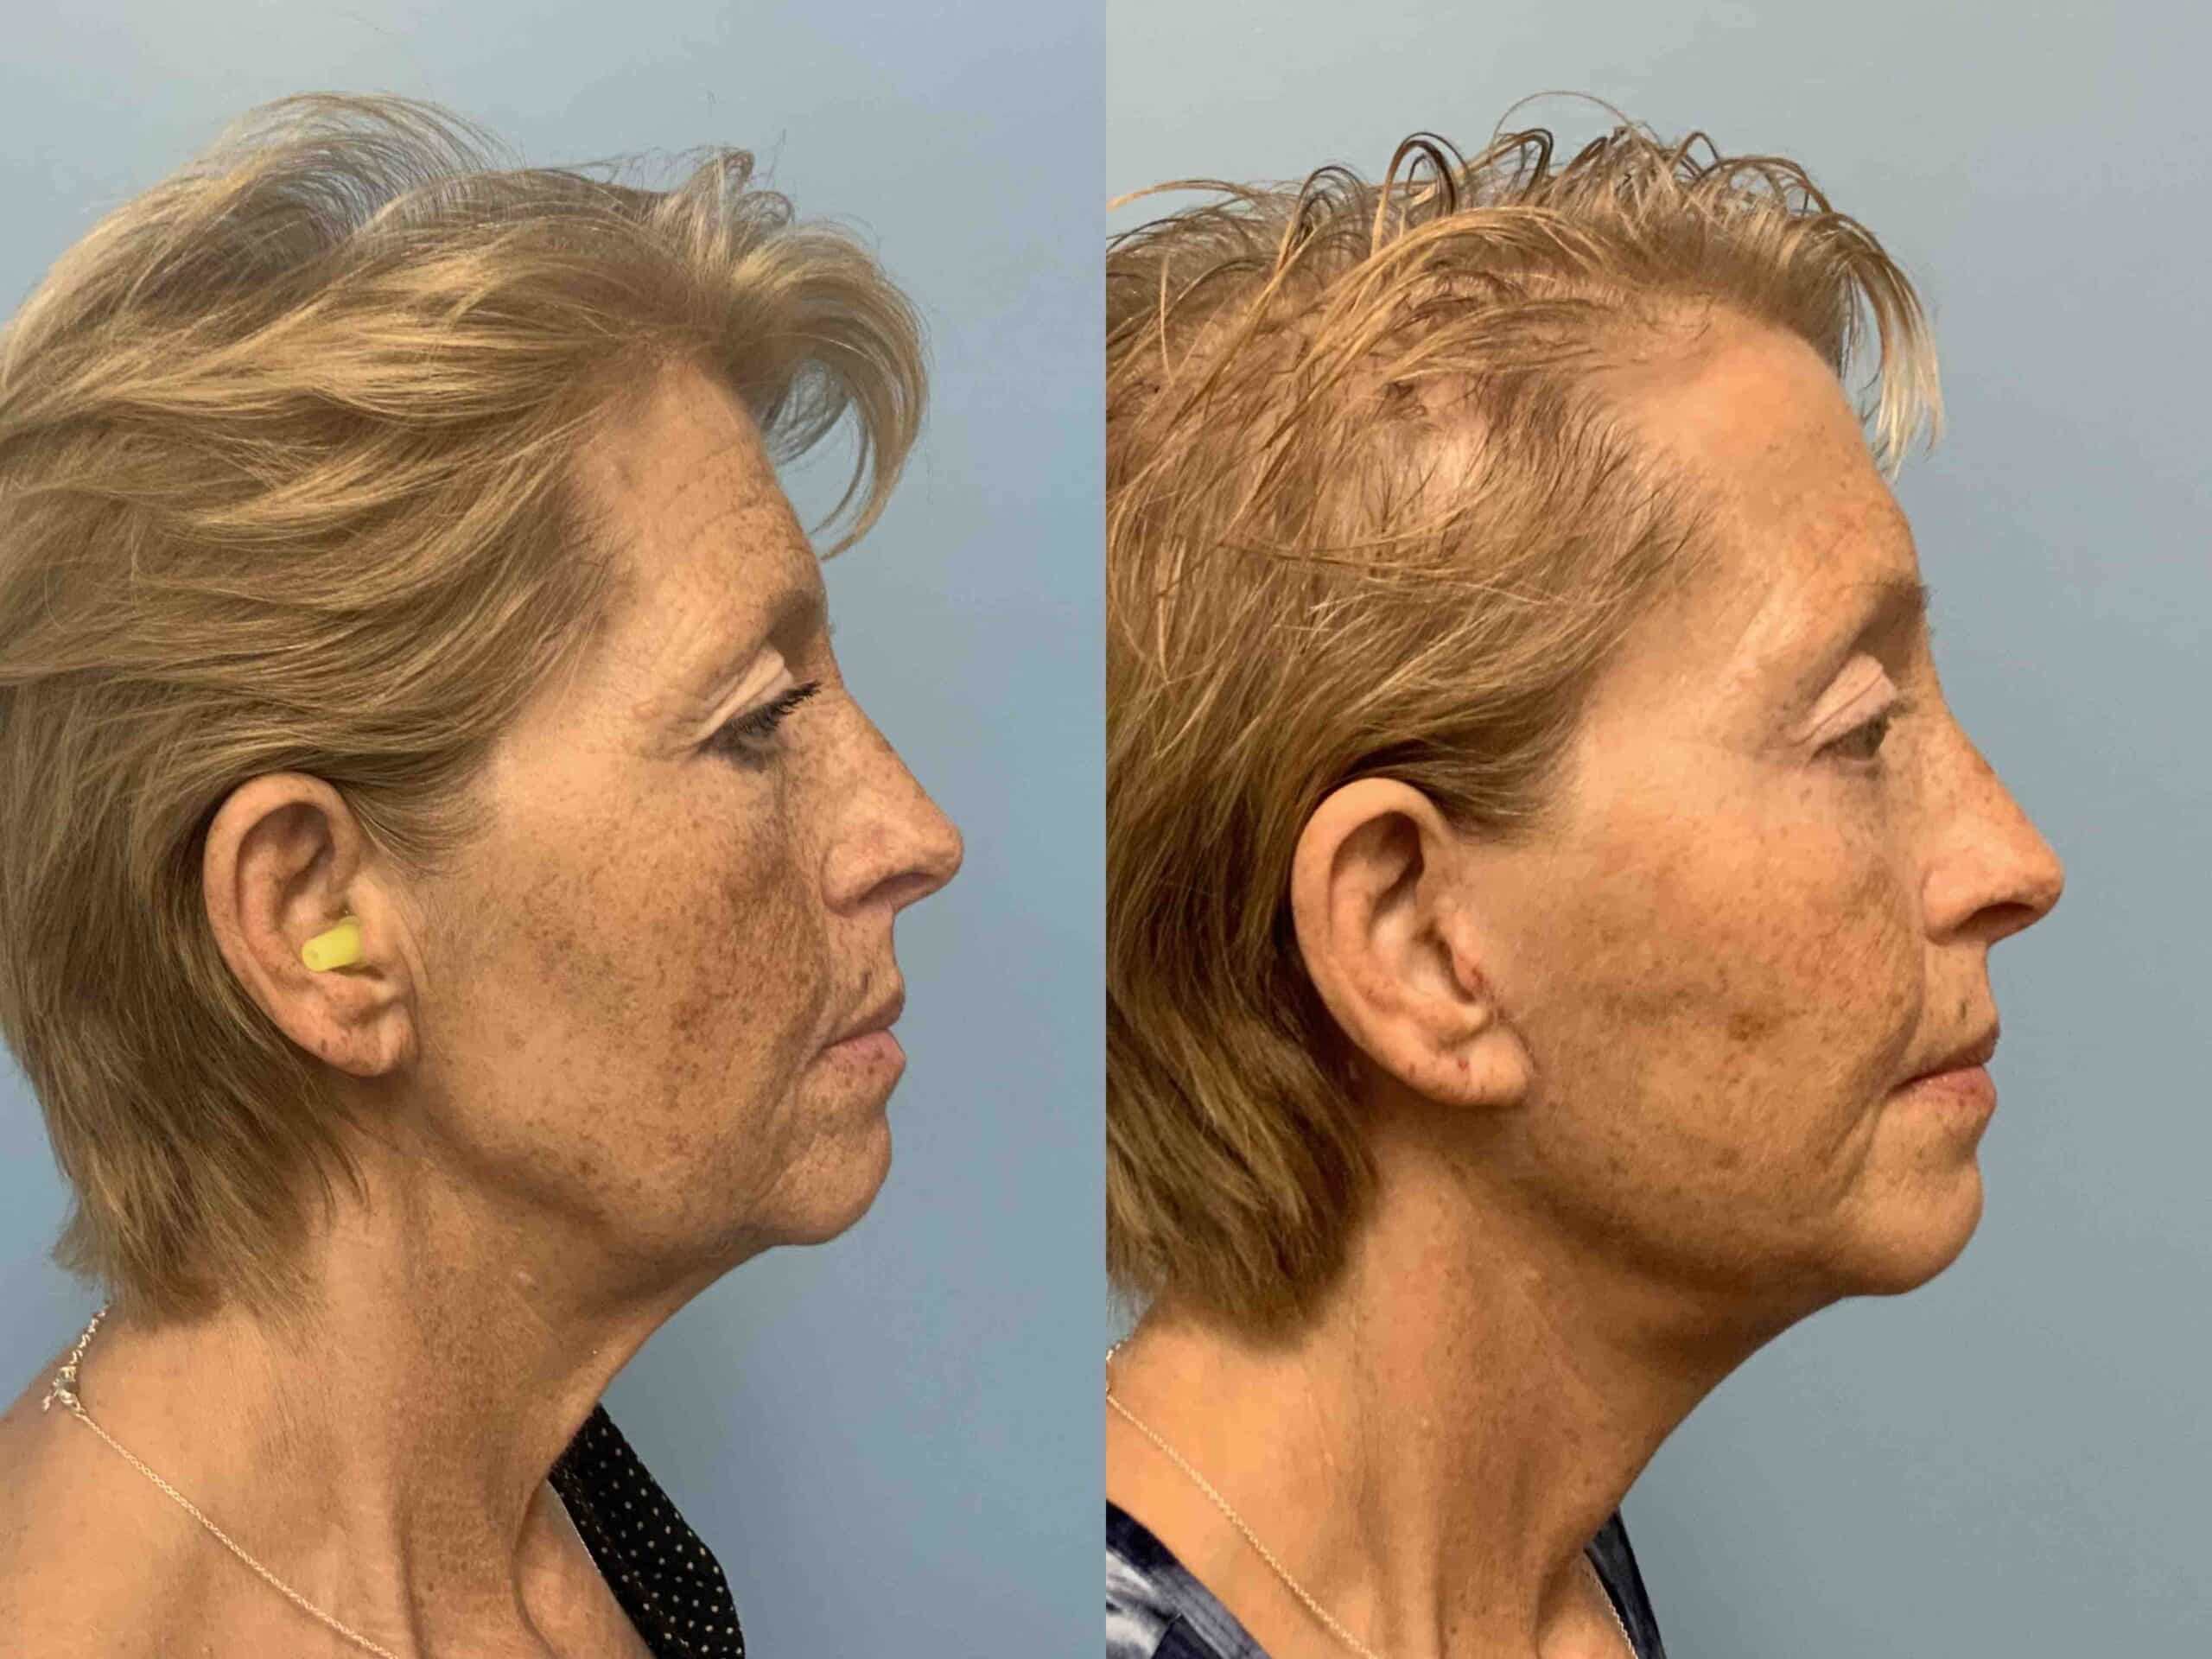 Before and after, patient 3 mo post op from Facelift, Neck Lift, Lower Blepharoplasty, Autologous fat Transfer Face procedures performed by Dr. Paul Vanek